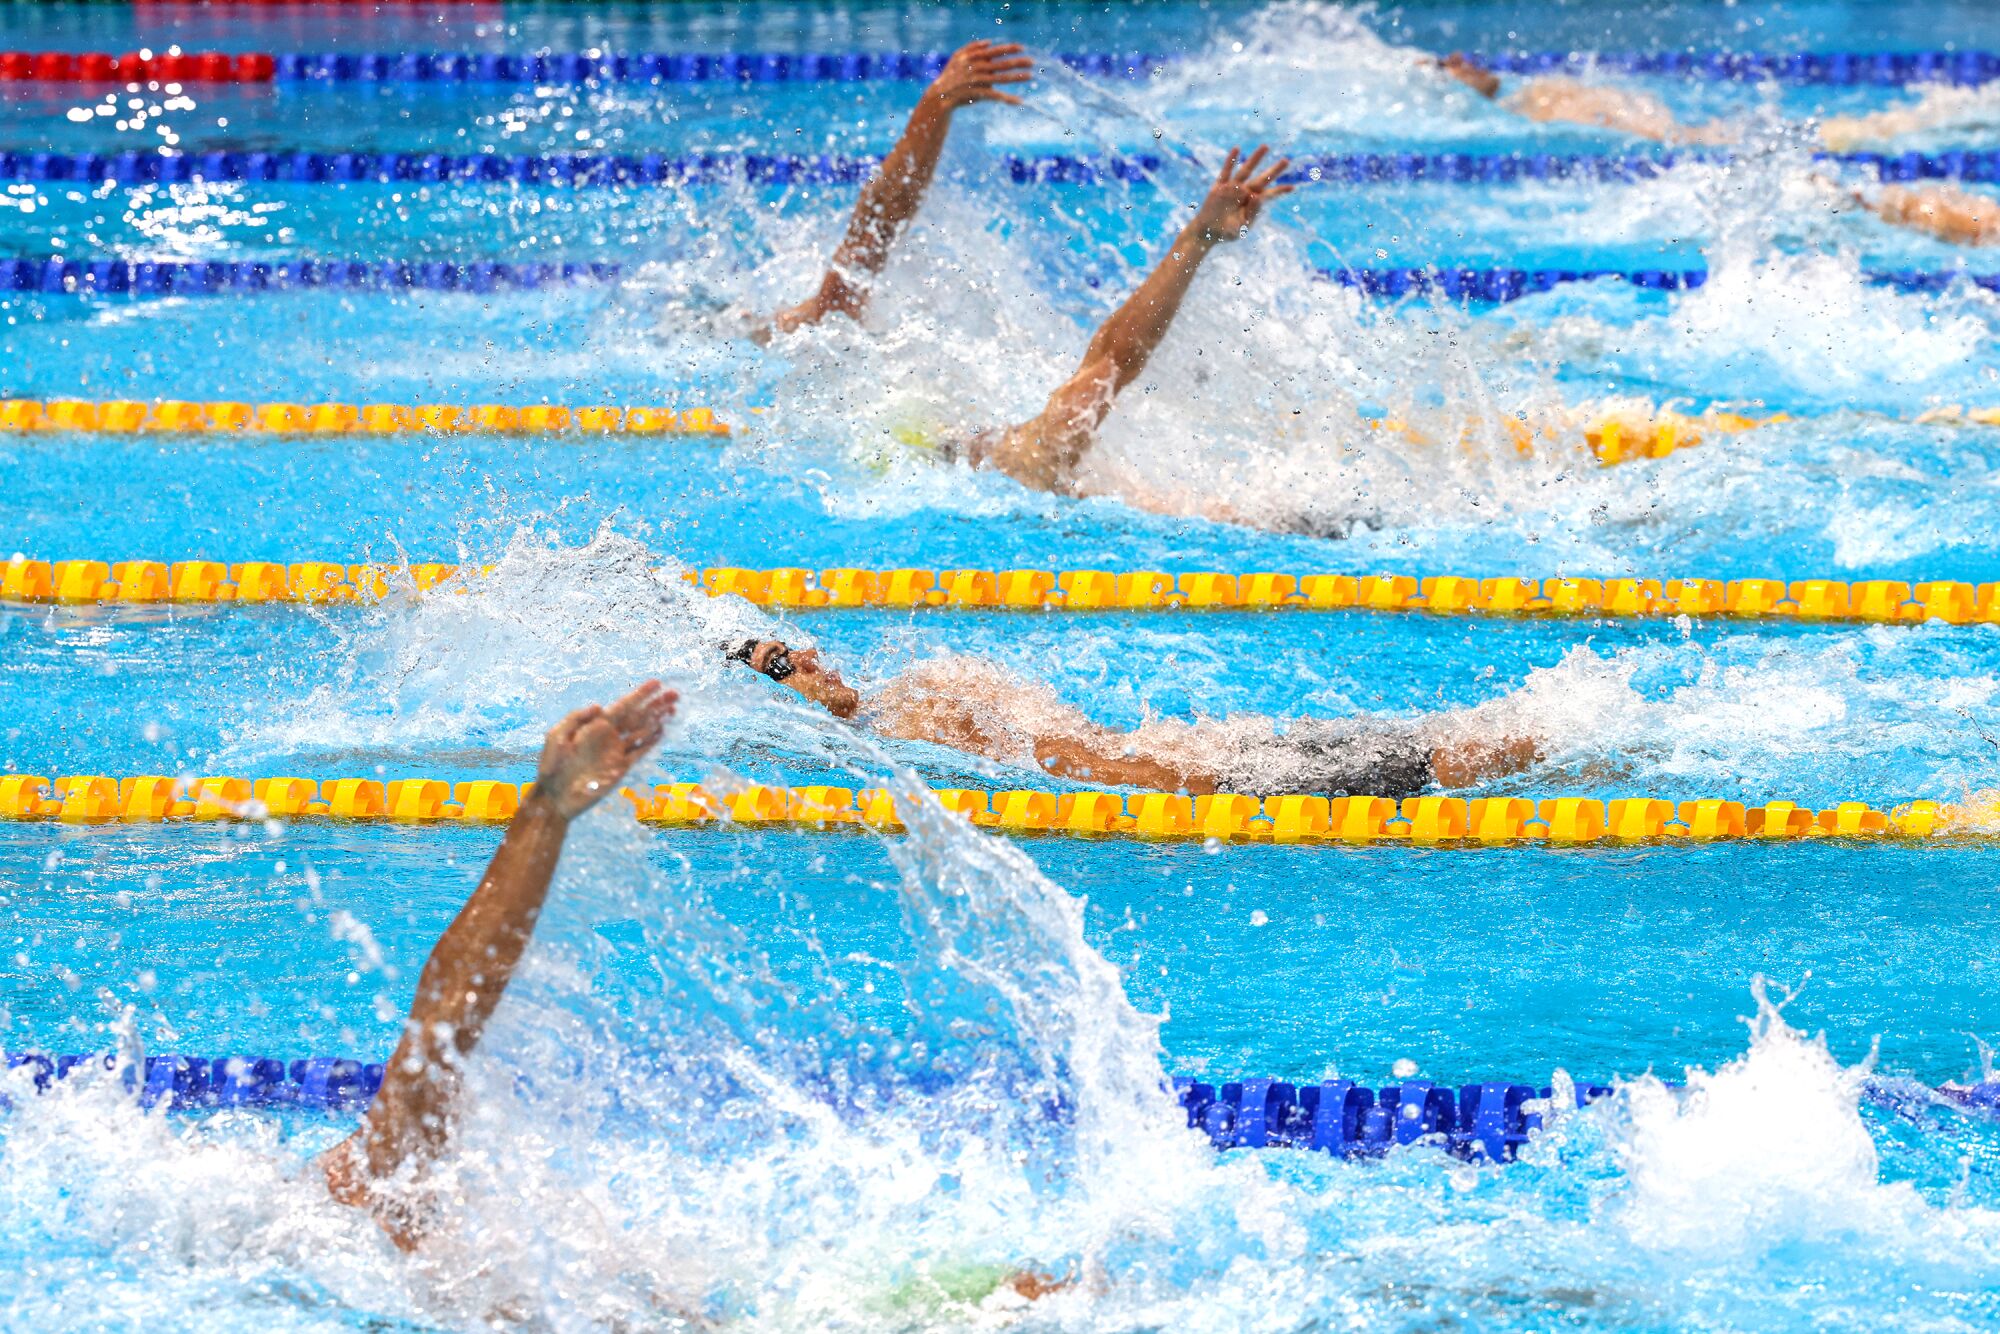 Swimmers compete in the Men's 100m Backstroke semifinal.